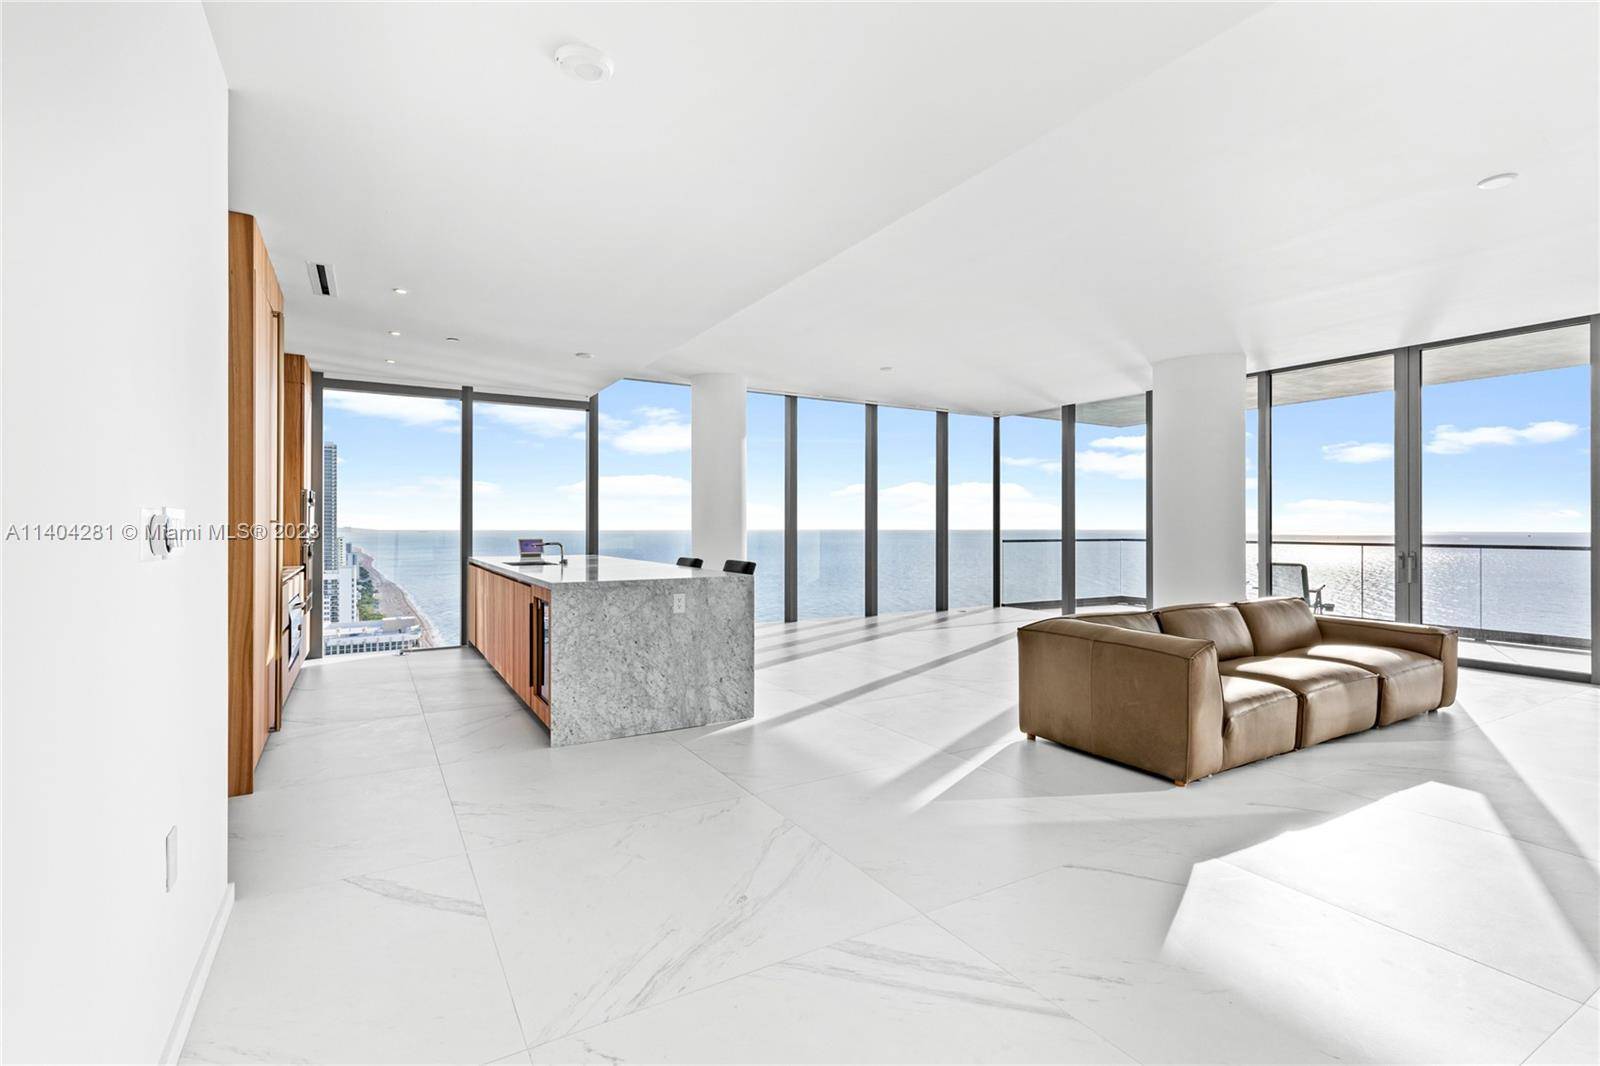 Situated just north of the beautiful Golden Beach in South Florida, 2000 Ocean stands as a modern, 38 story glass tower that presents captivating, panoramic views of the Atlantic Ocean, ...